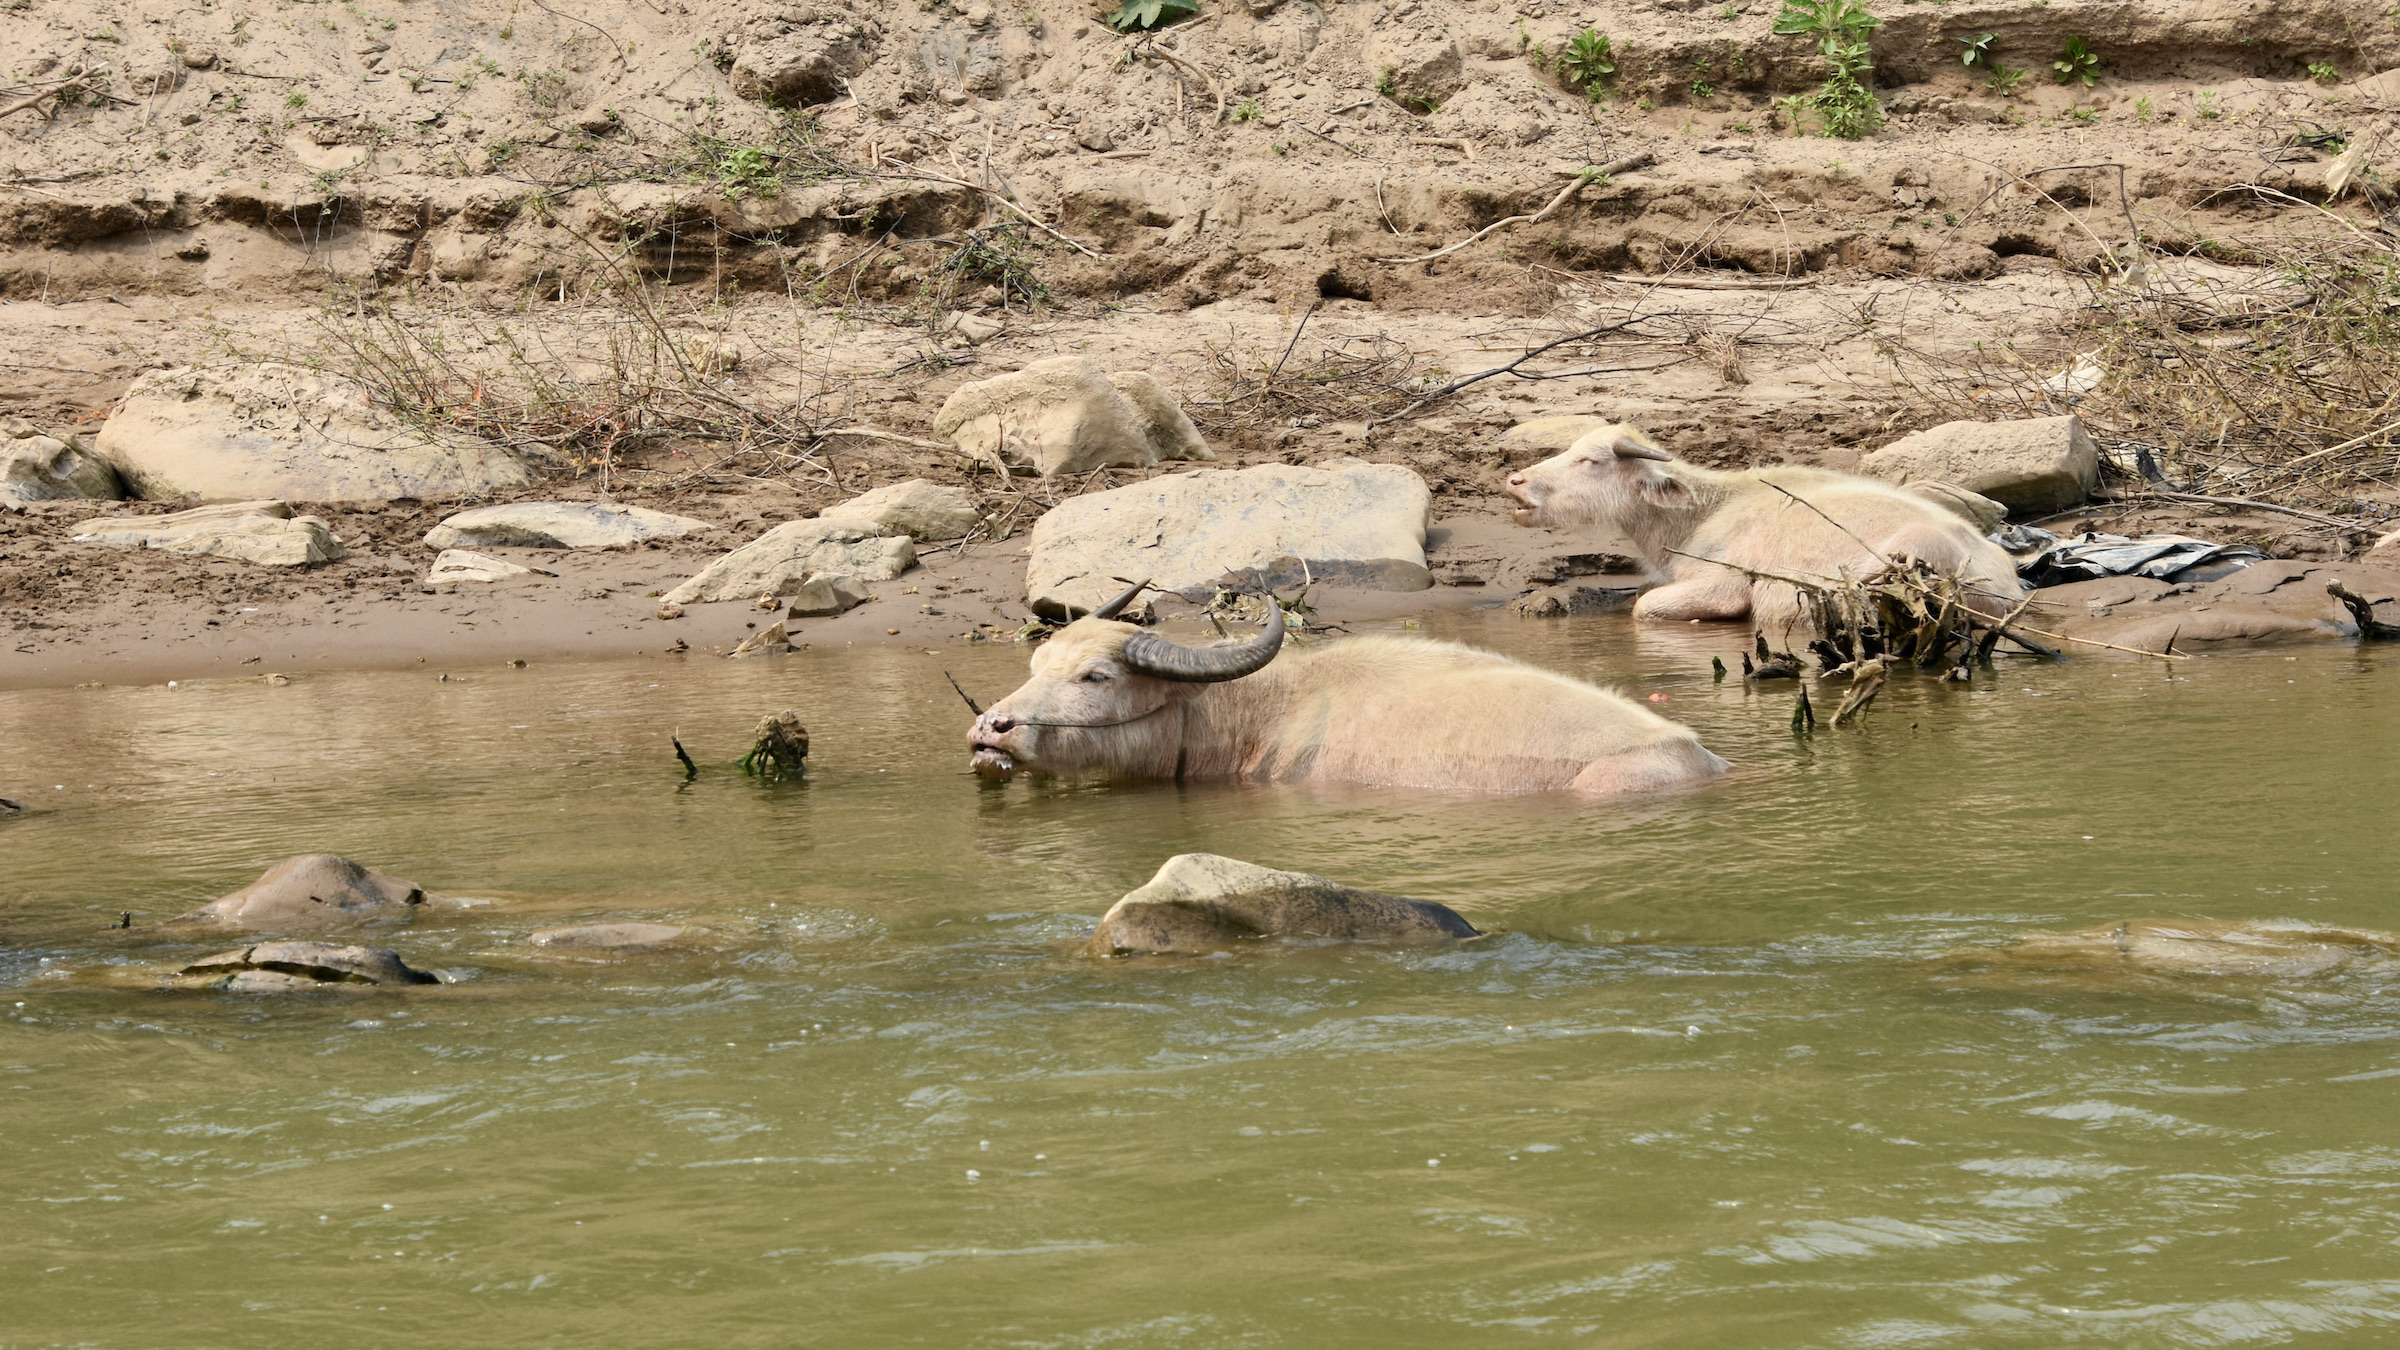 Half Submerged Water Buffalo in the Mekong River